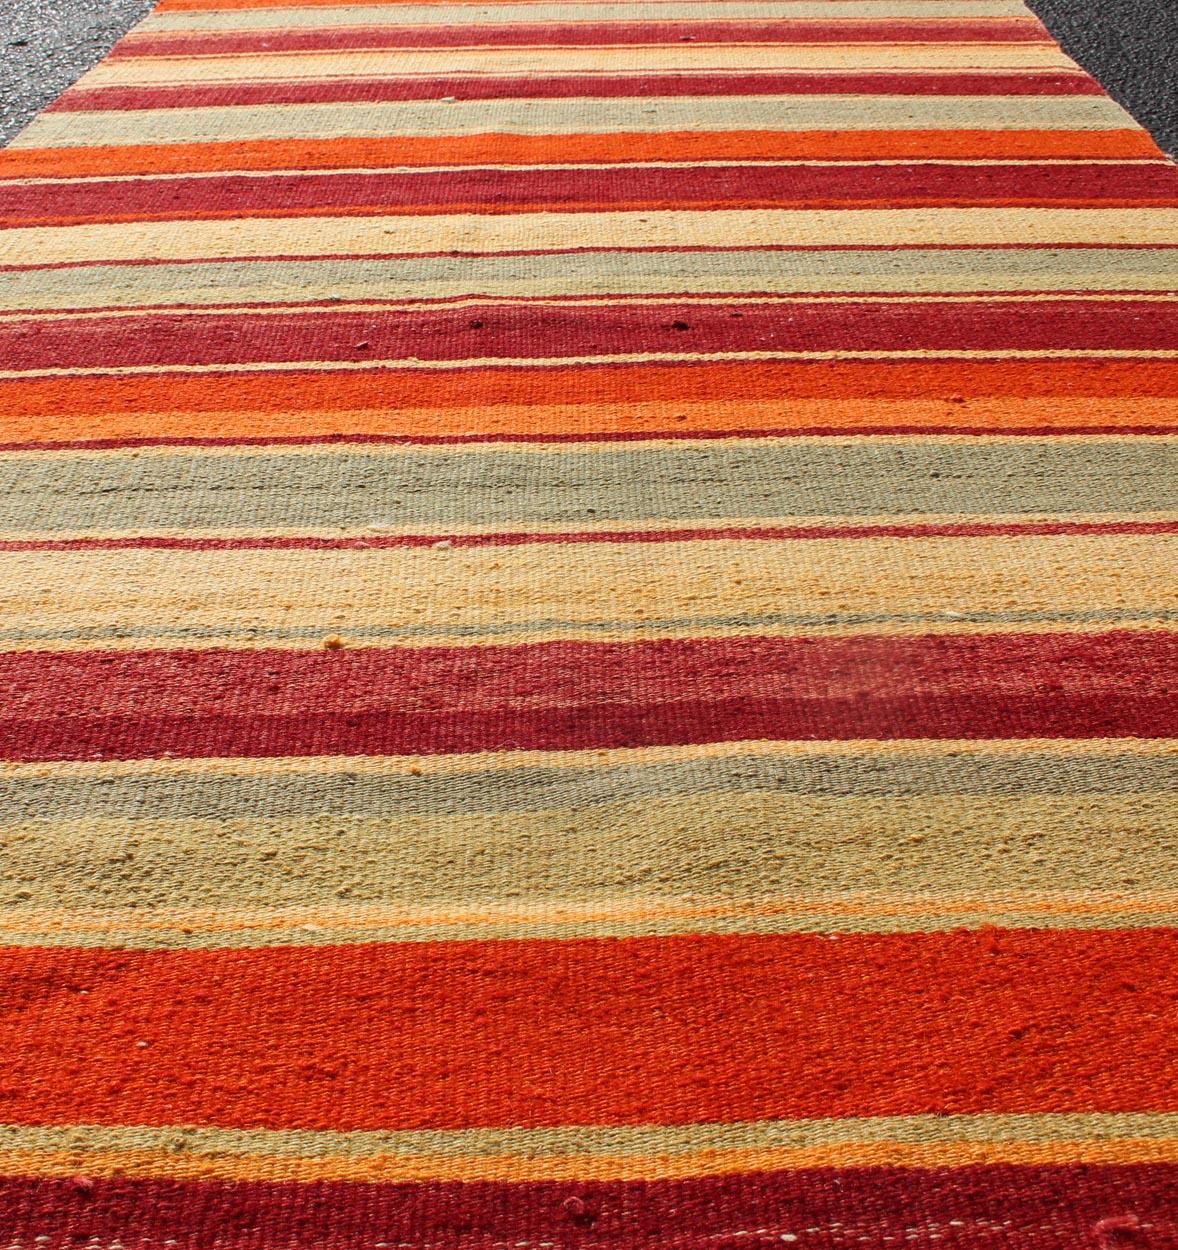 20th Century Vintage Turkish Kilim Runner with Stripes in Red, Green, Yellow, and Orange For Sale